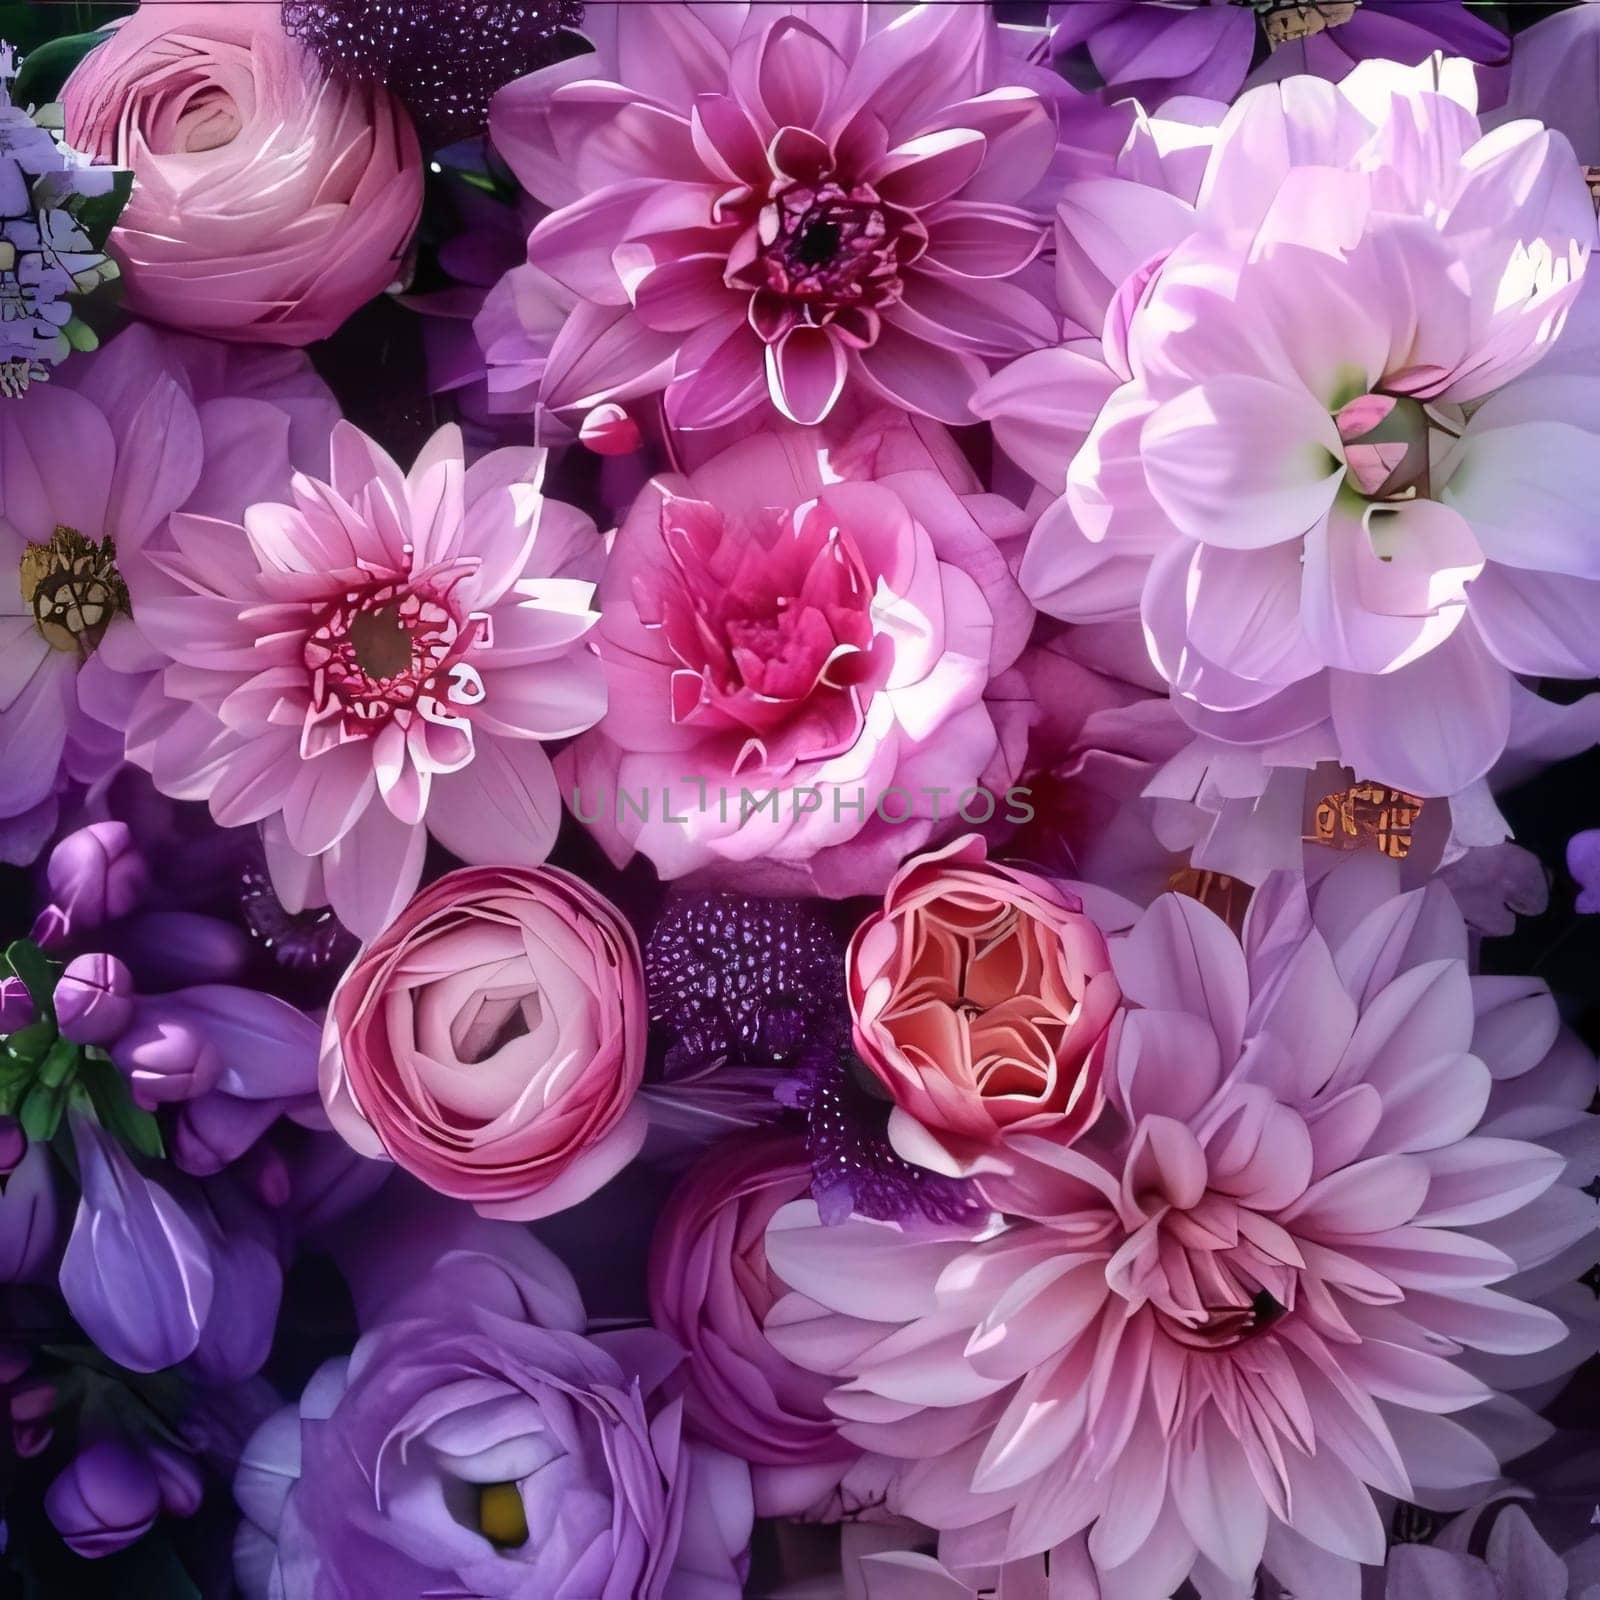 Top view of colorful white, pink purple flower heads petals. Flowering flowers, a symbol of spring, new life. A joyful time of nature awakening to life.